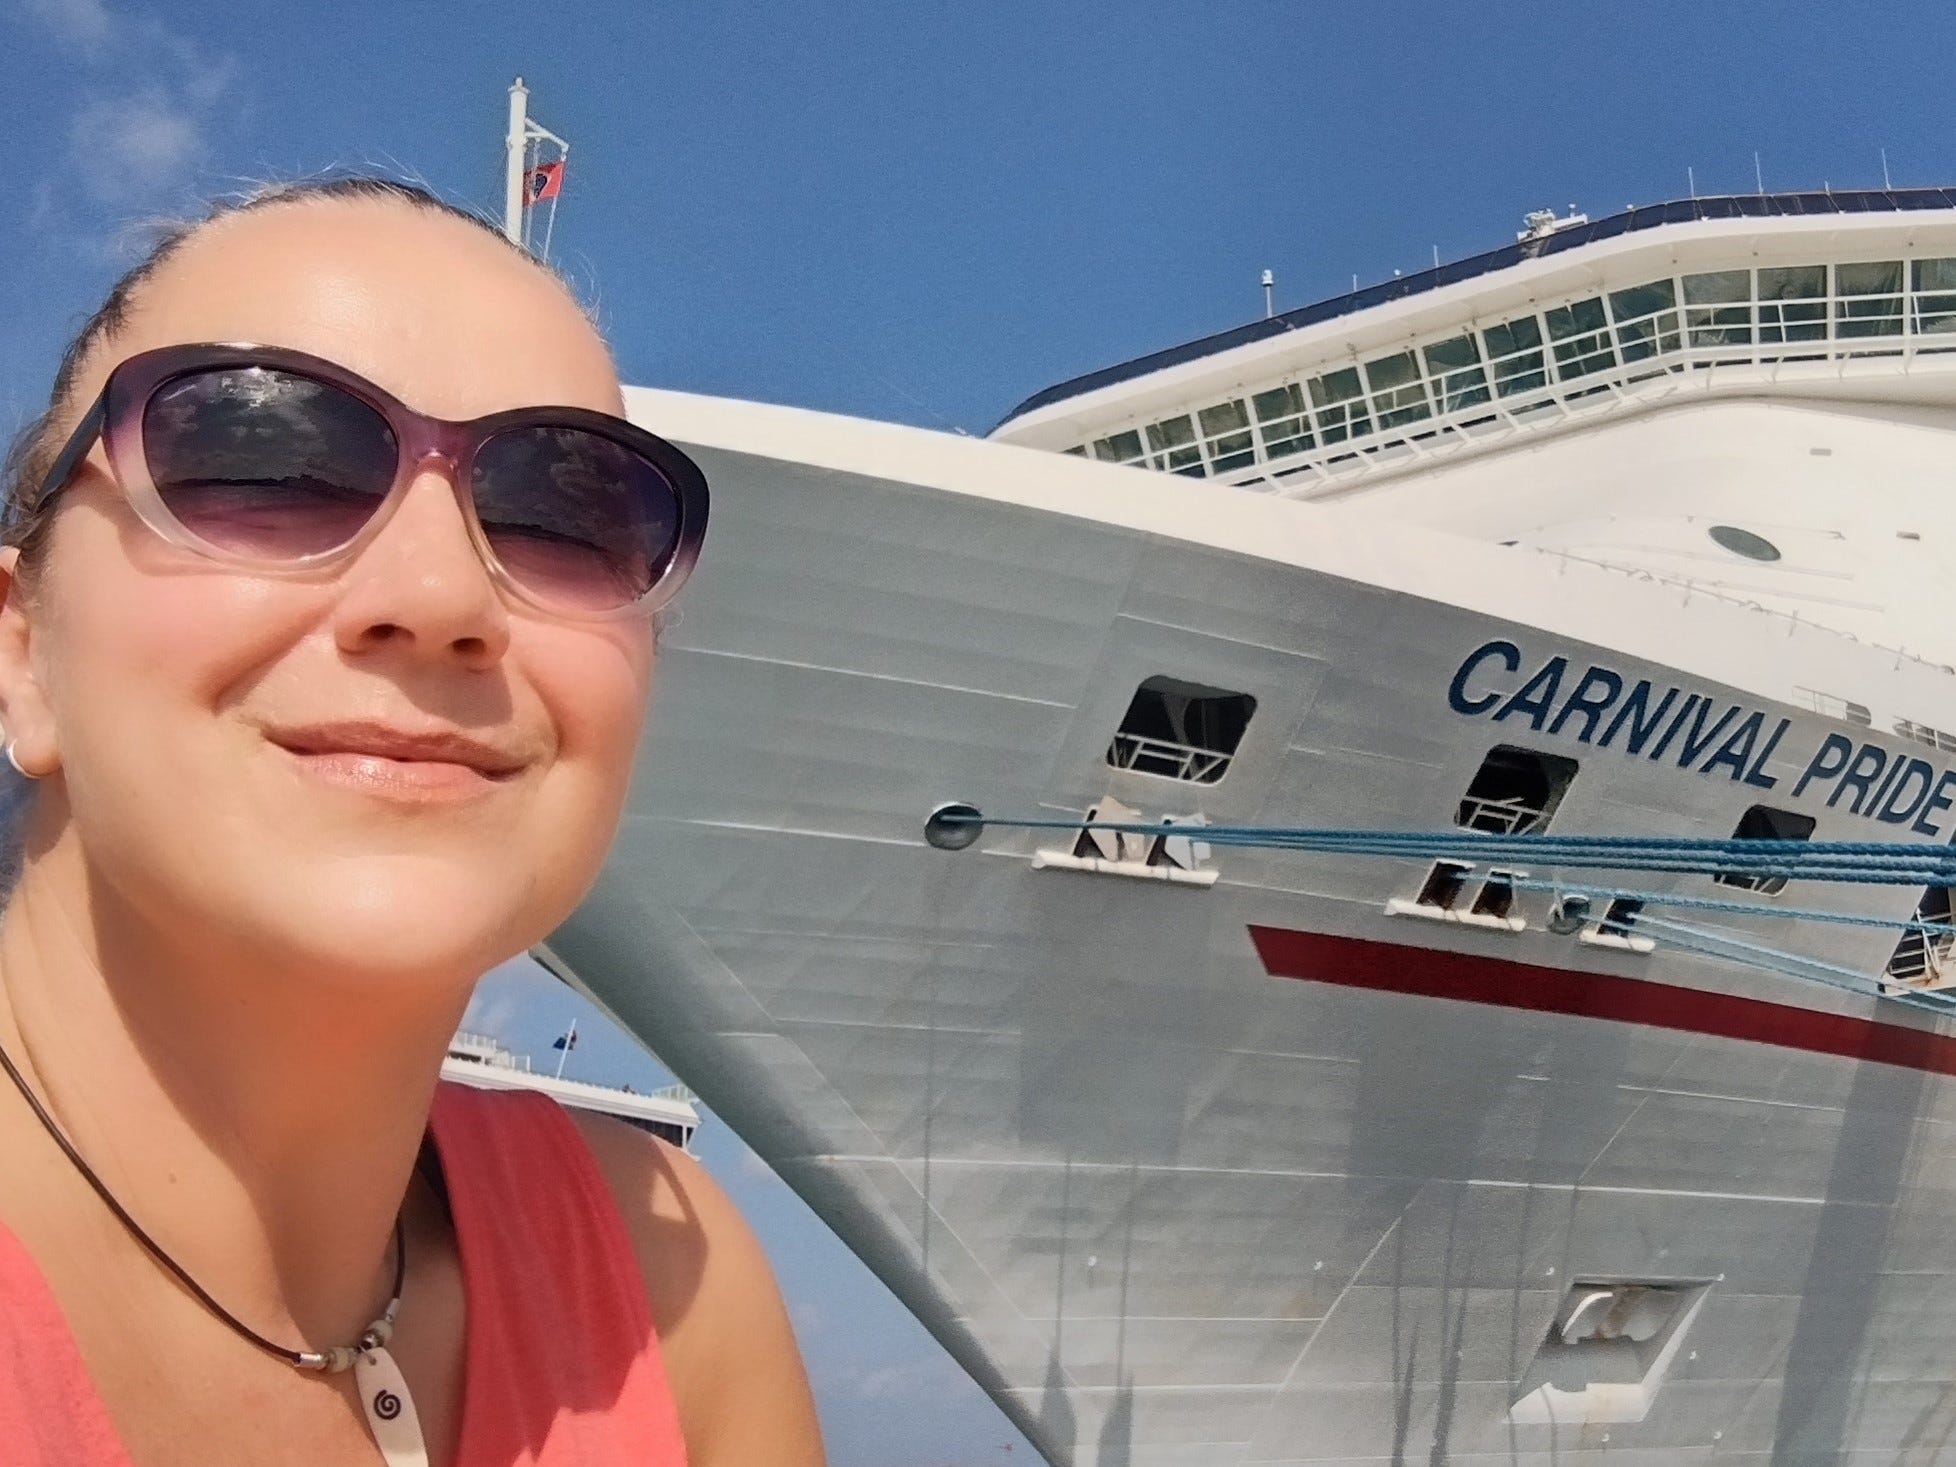 <ul class="summary-list"> <li>I've been on more than 10 Carnival cruises in 5 years and consider them a home away from home.</li> <li>As a frequent Carnival cruiser, I've noticed first-timers repeat the same mistakes.</li> <li>From overpacking to buying a drink package, here are the mistakes I see on Carnival cruises. </li> </ul><div class="read-original">Read the original article on <a href="https://www.insider.com/carnival-cruises-mistakes-people-make-first-cruise-2023-3">Insider</a></div>